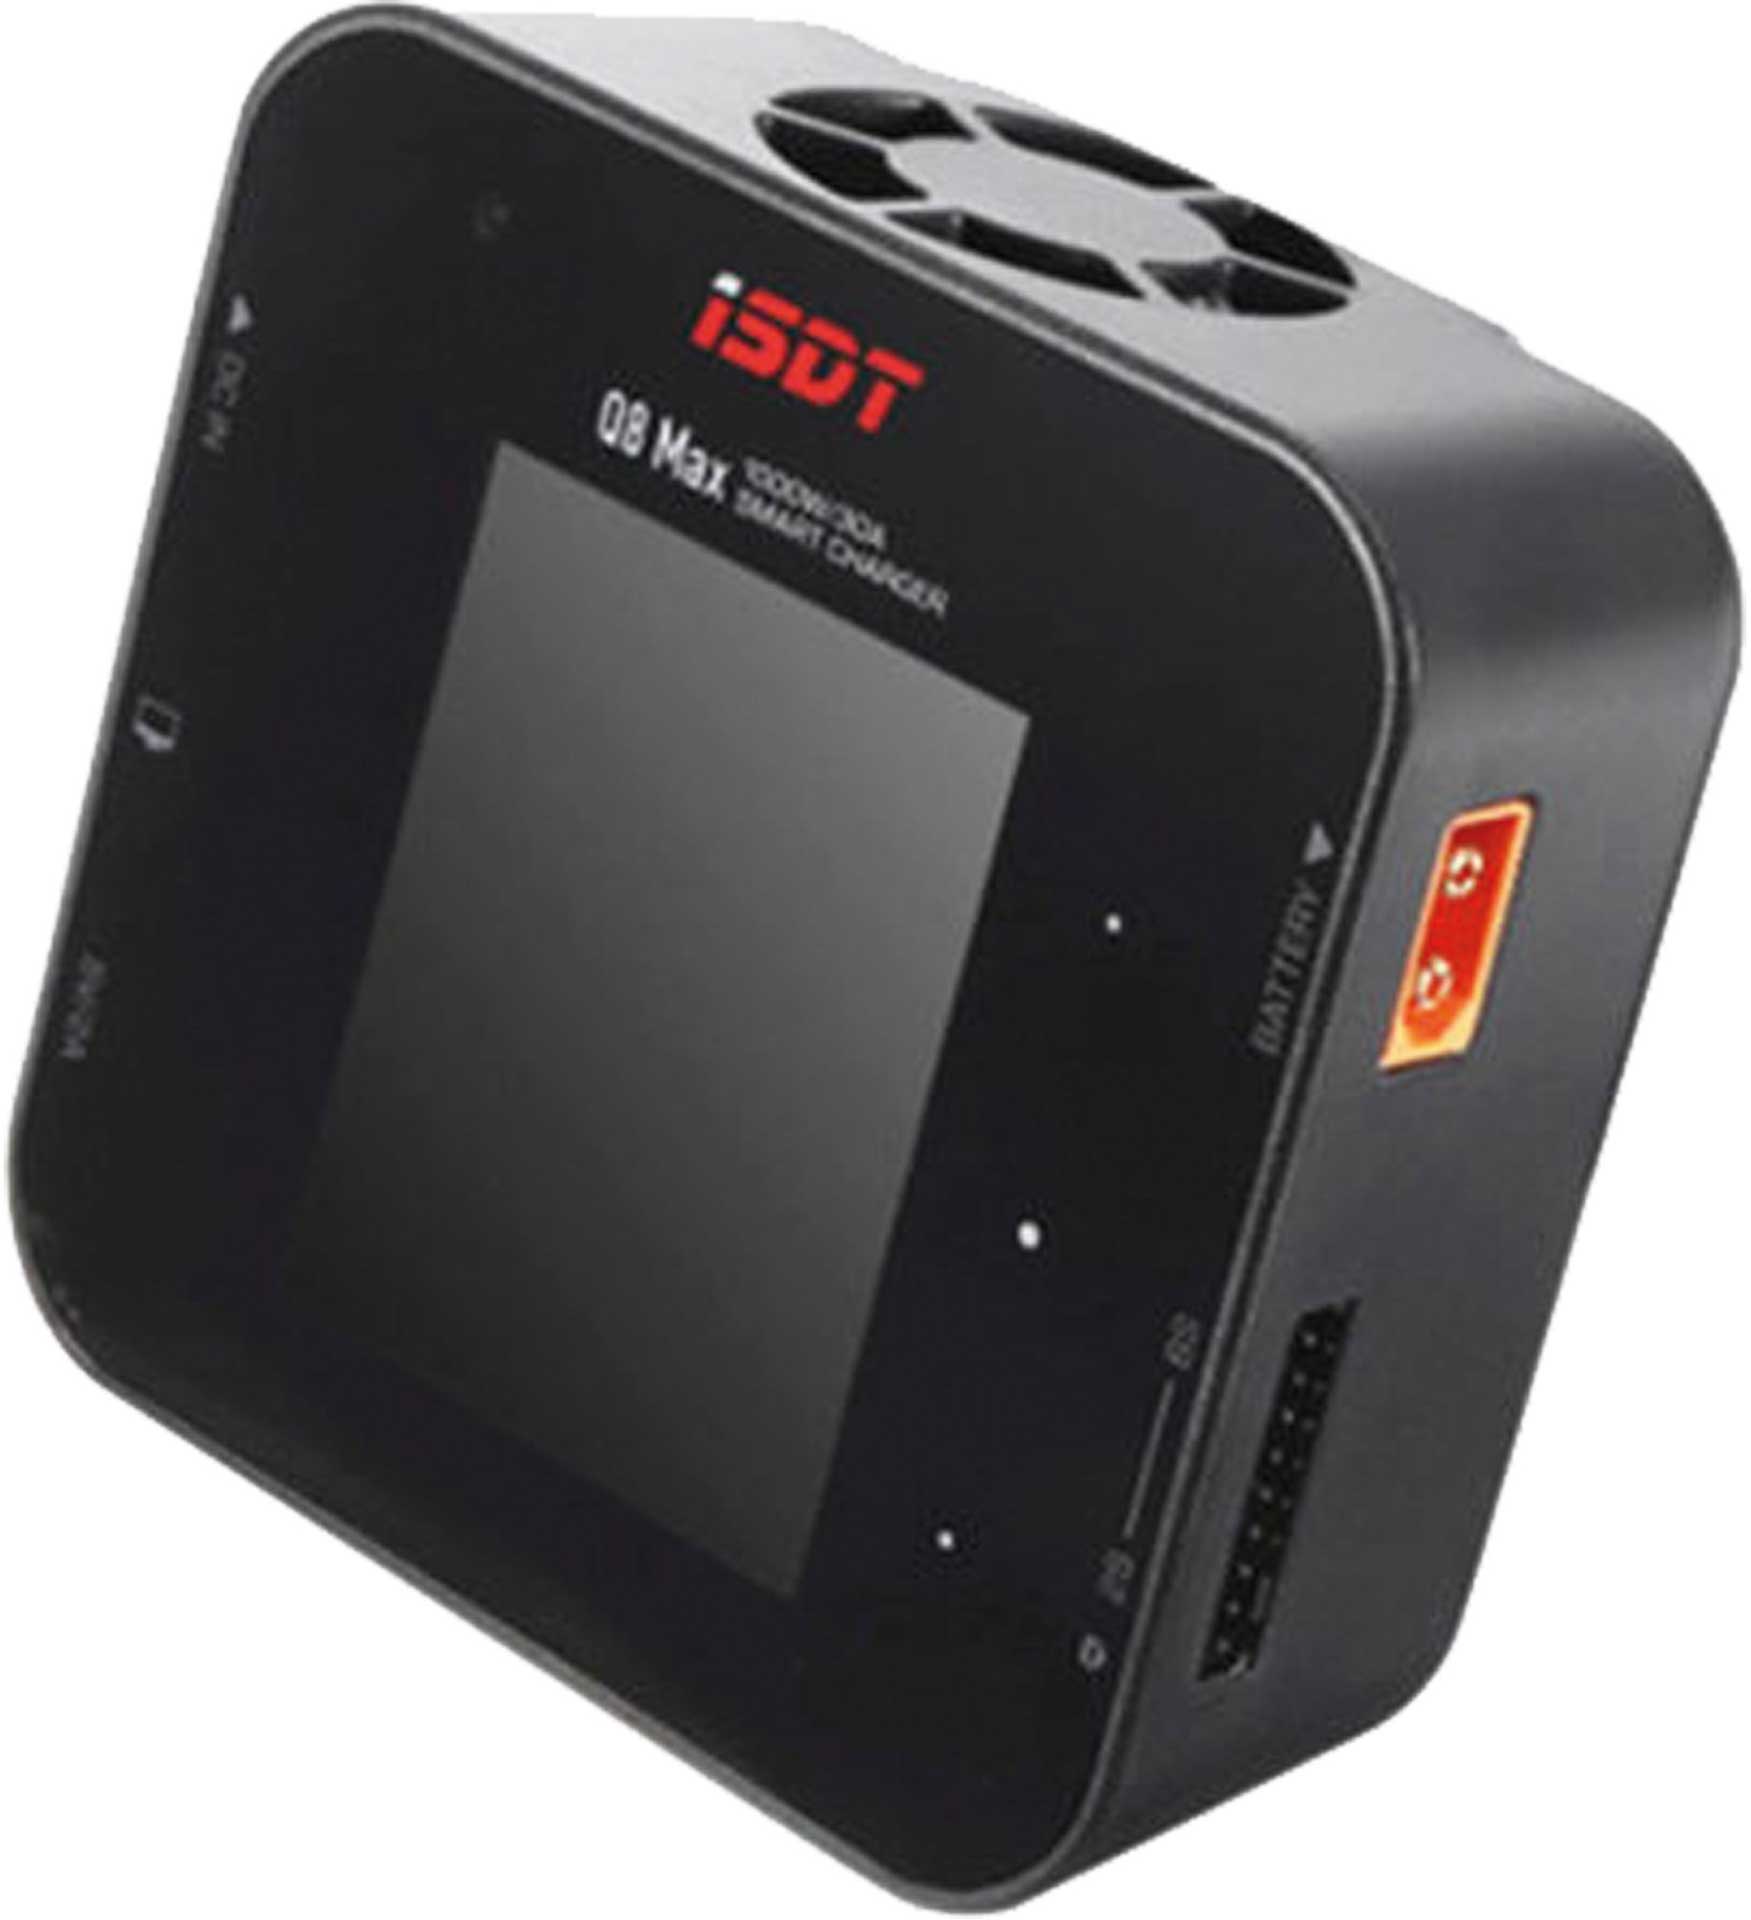 ISDT Q8 MAX SMART CHARGER 1000W 1-7(8)S -30A Ladegerät